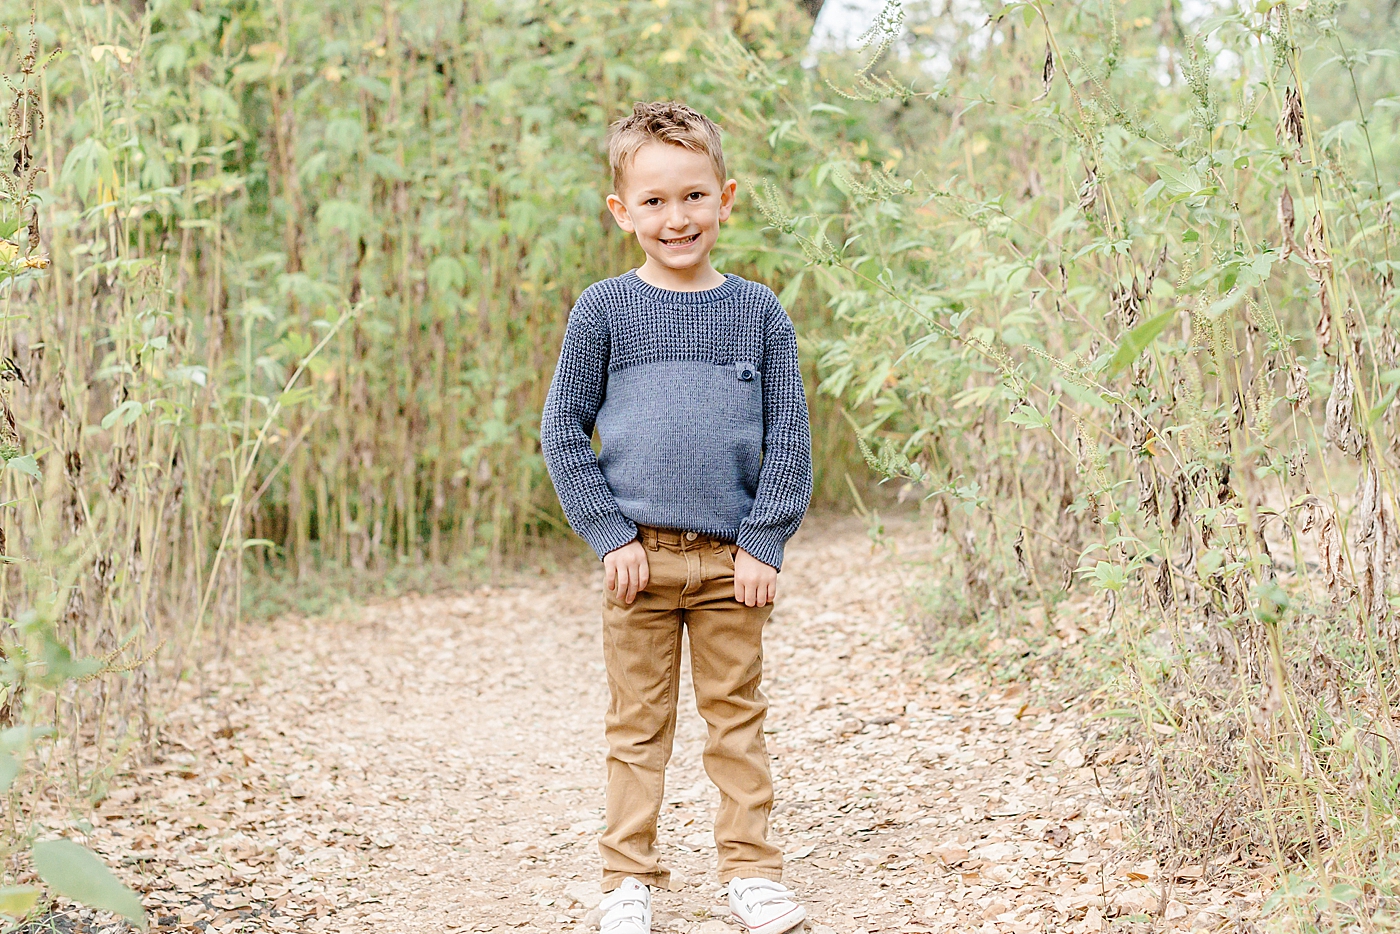 Smiling little boy in a blue sweater | Image by Sana Ahmed Photography